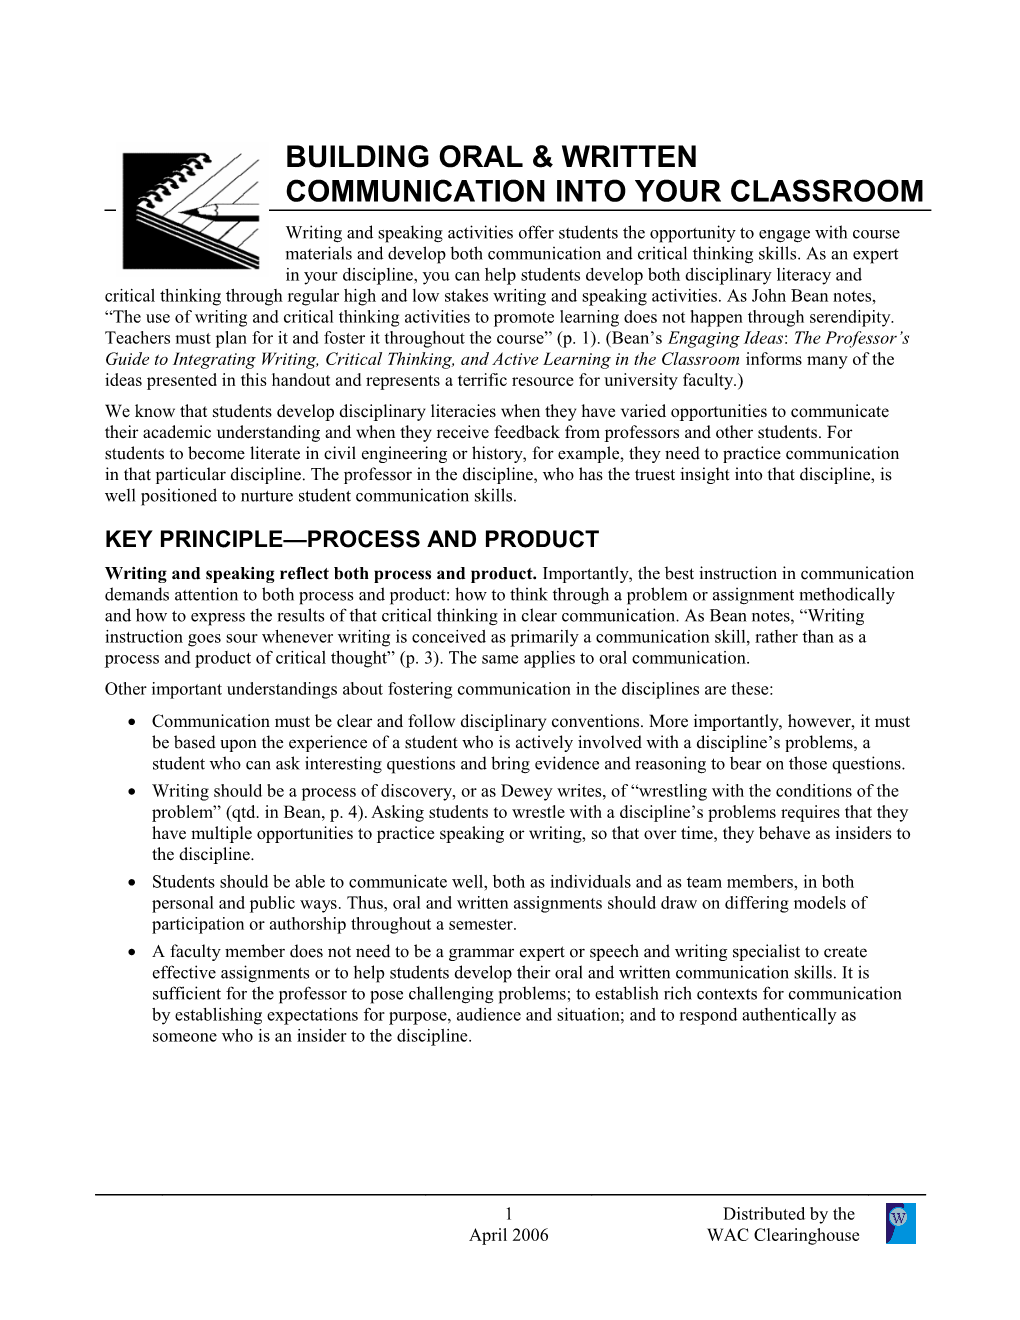 Building Oral & Written Communication Into Your Classroom